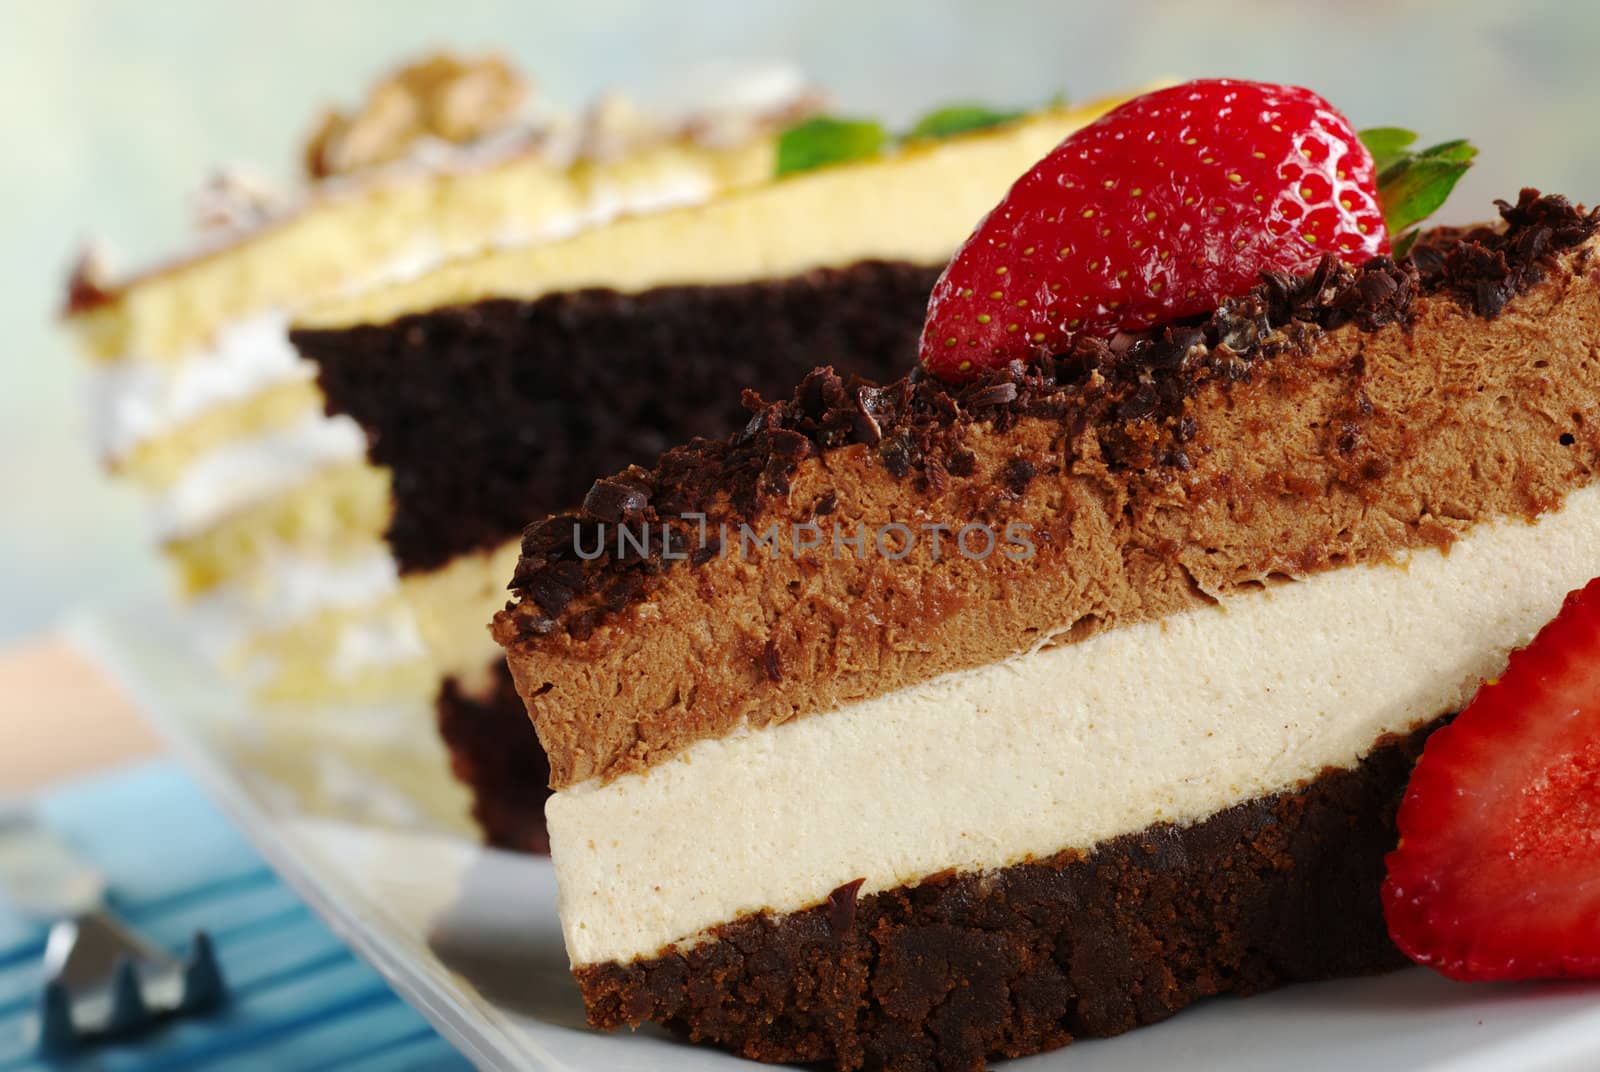 Layer cakes on a long plate: Chocolate Mousse Cake, Lucuma Cake and Walnut Cake (Selective Focus, Focus on the cake in the front)